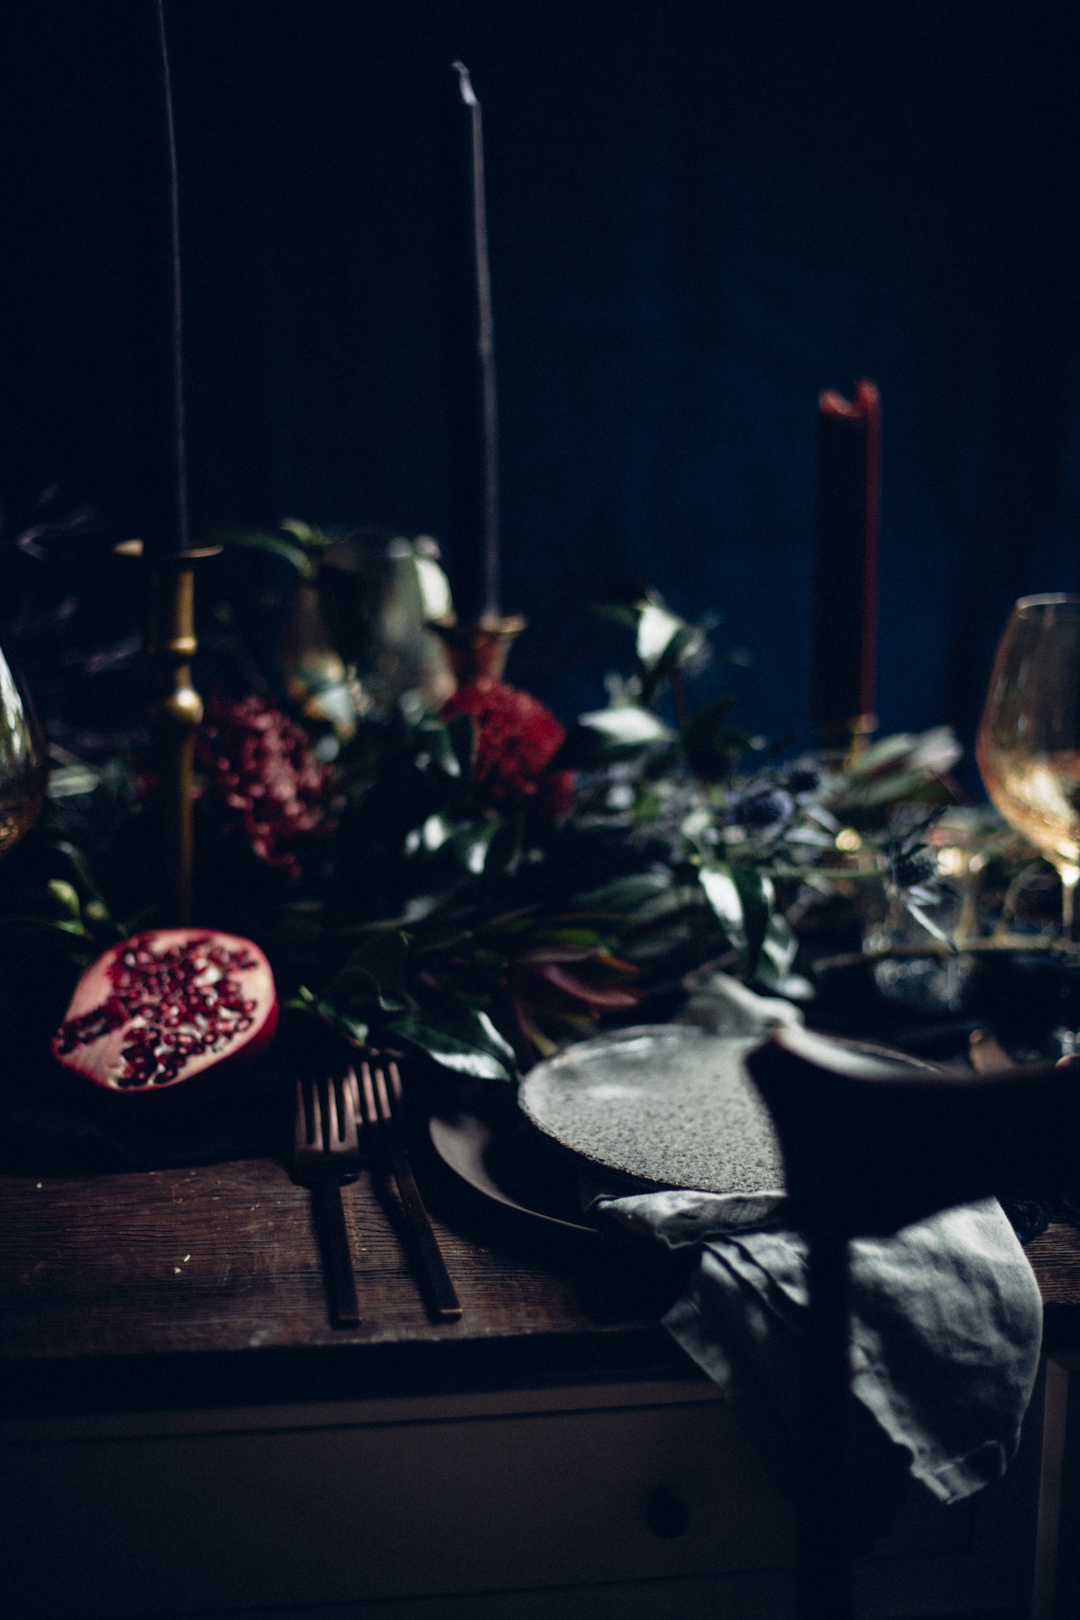 holiday-gatherings-photography-styling-by-christiannkoepke-com-11